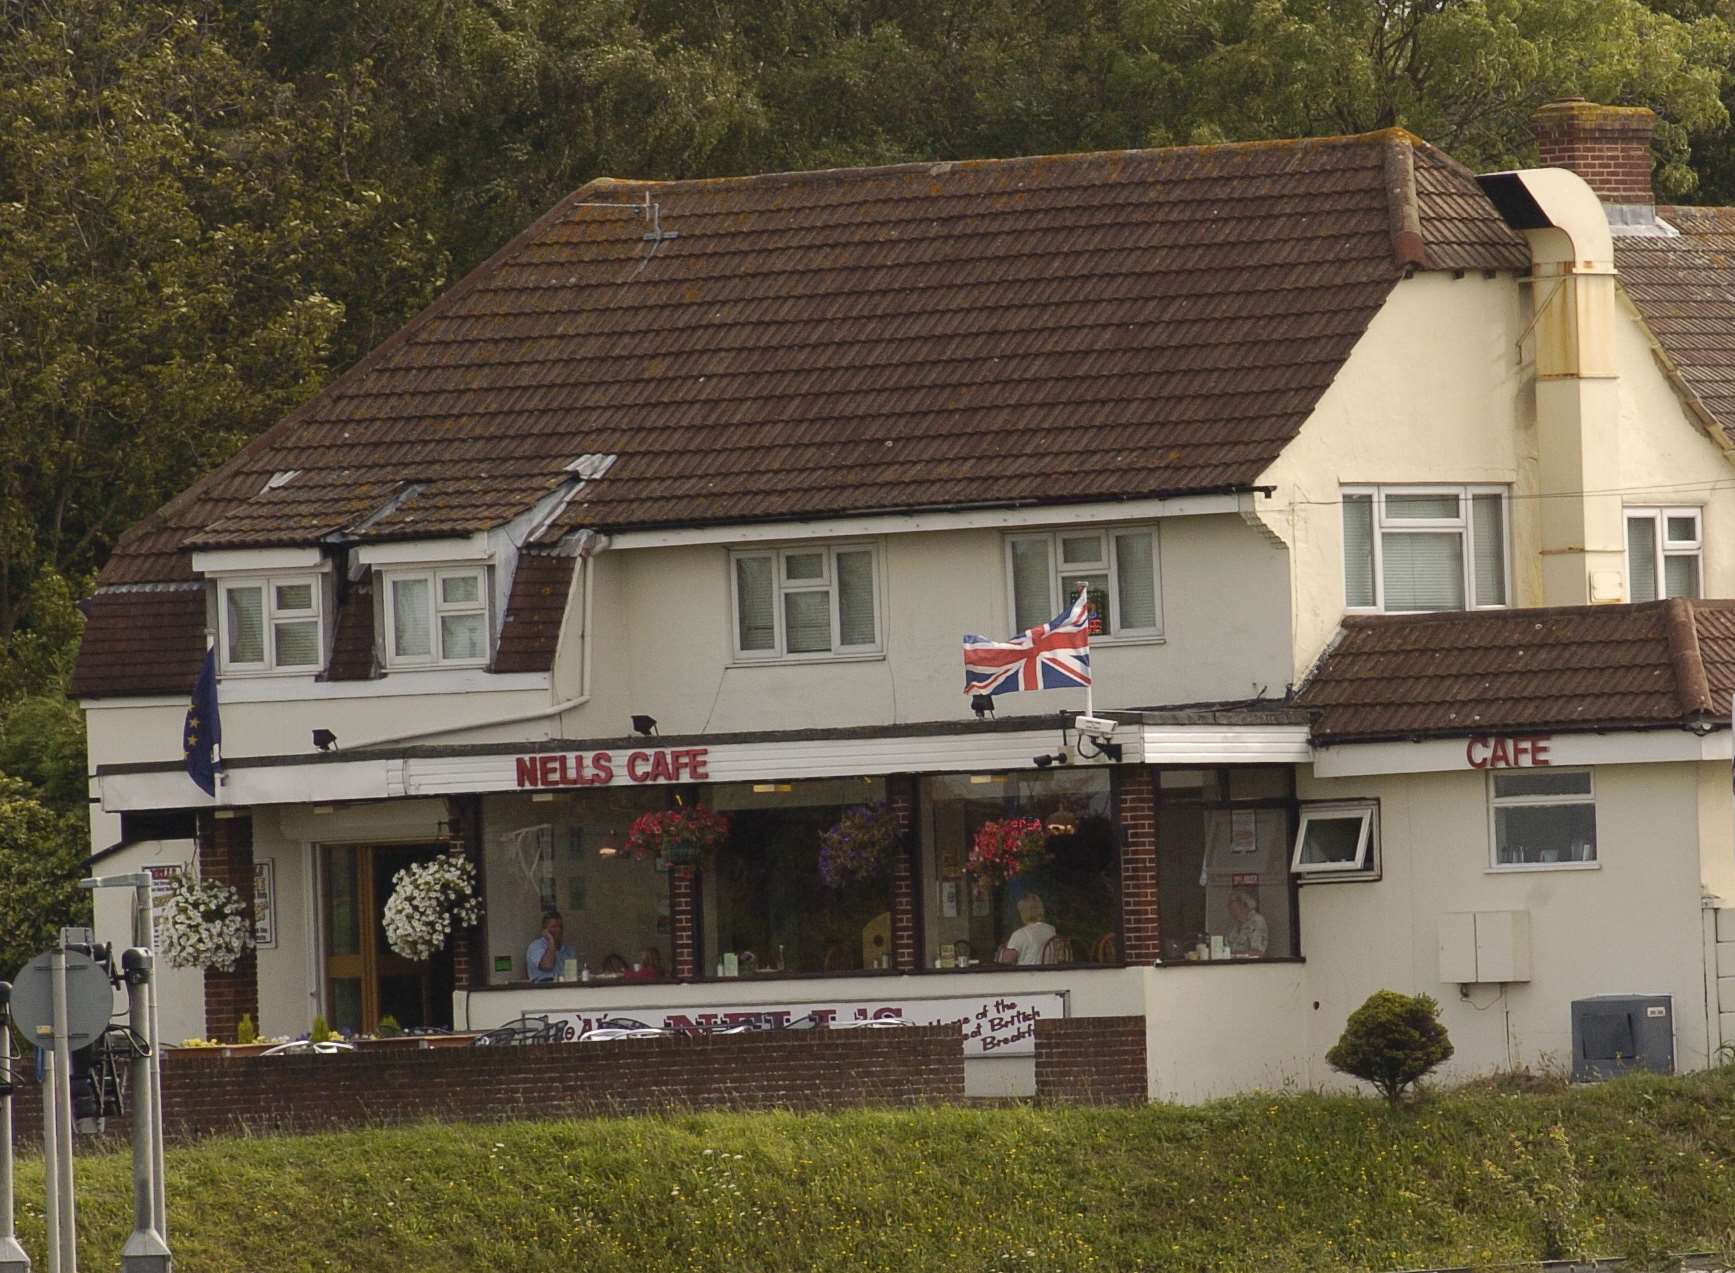 Nell's Cafe is in the running to be named Britain's Best Cafe. Picture: Steve Crispe